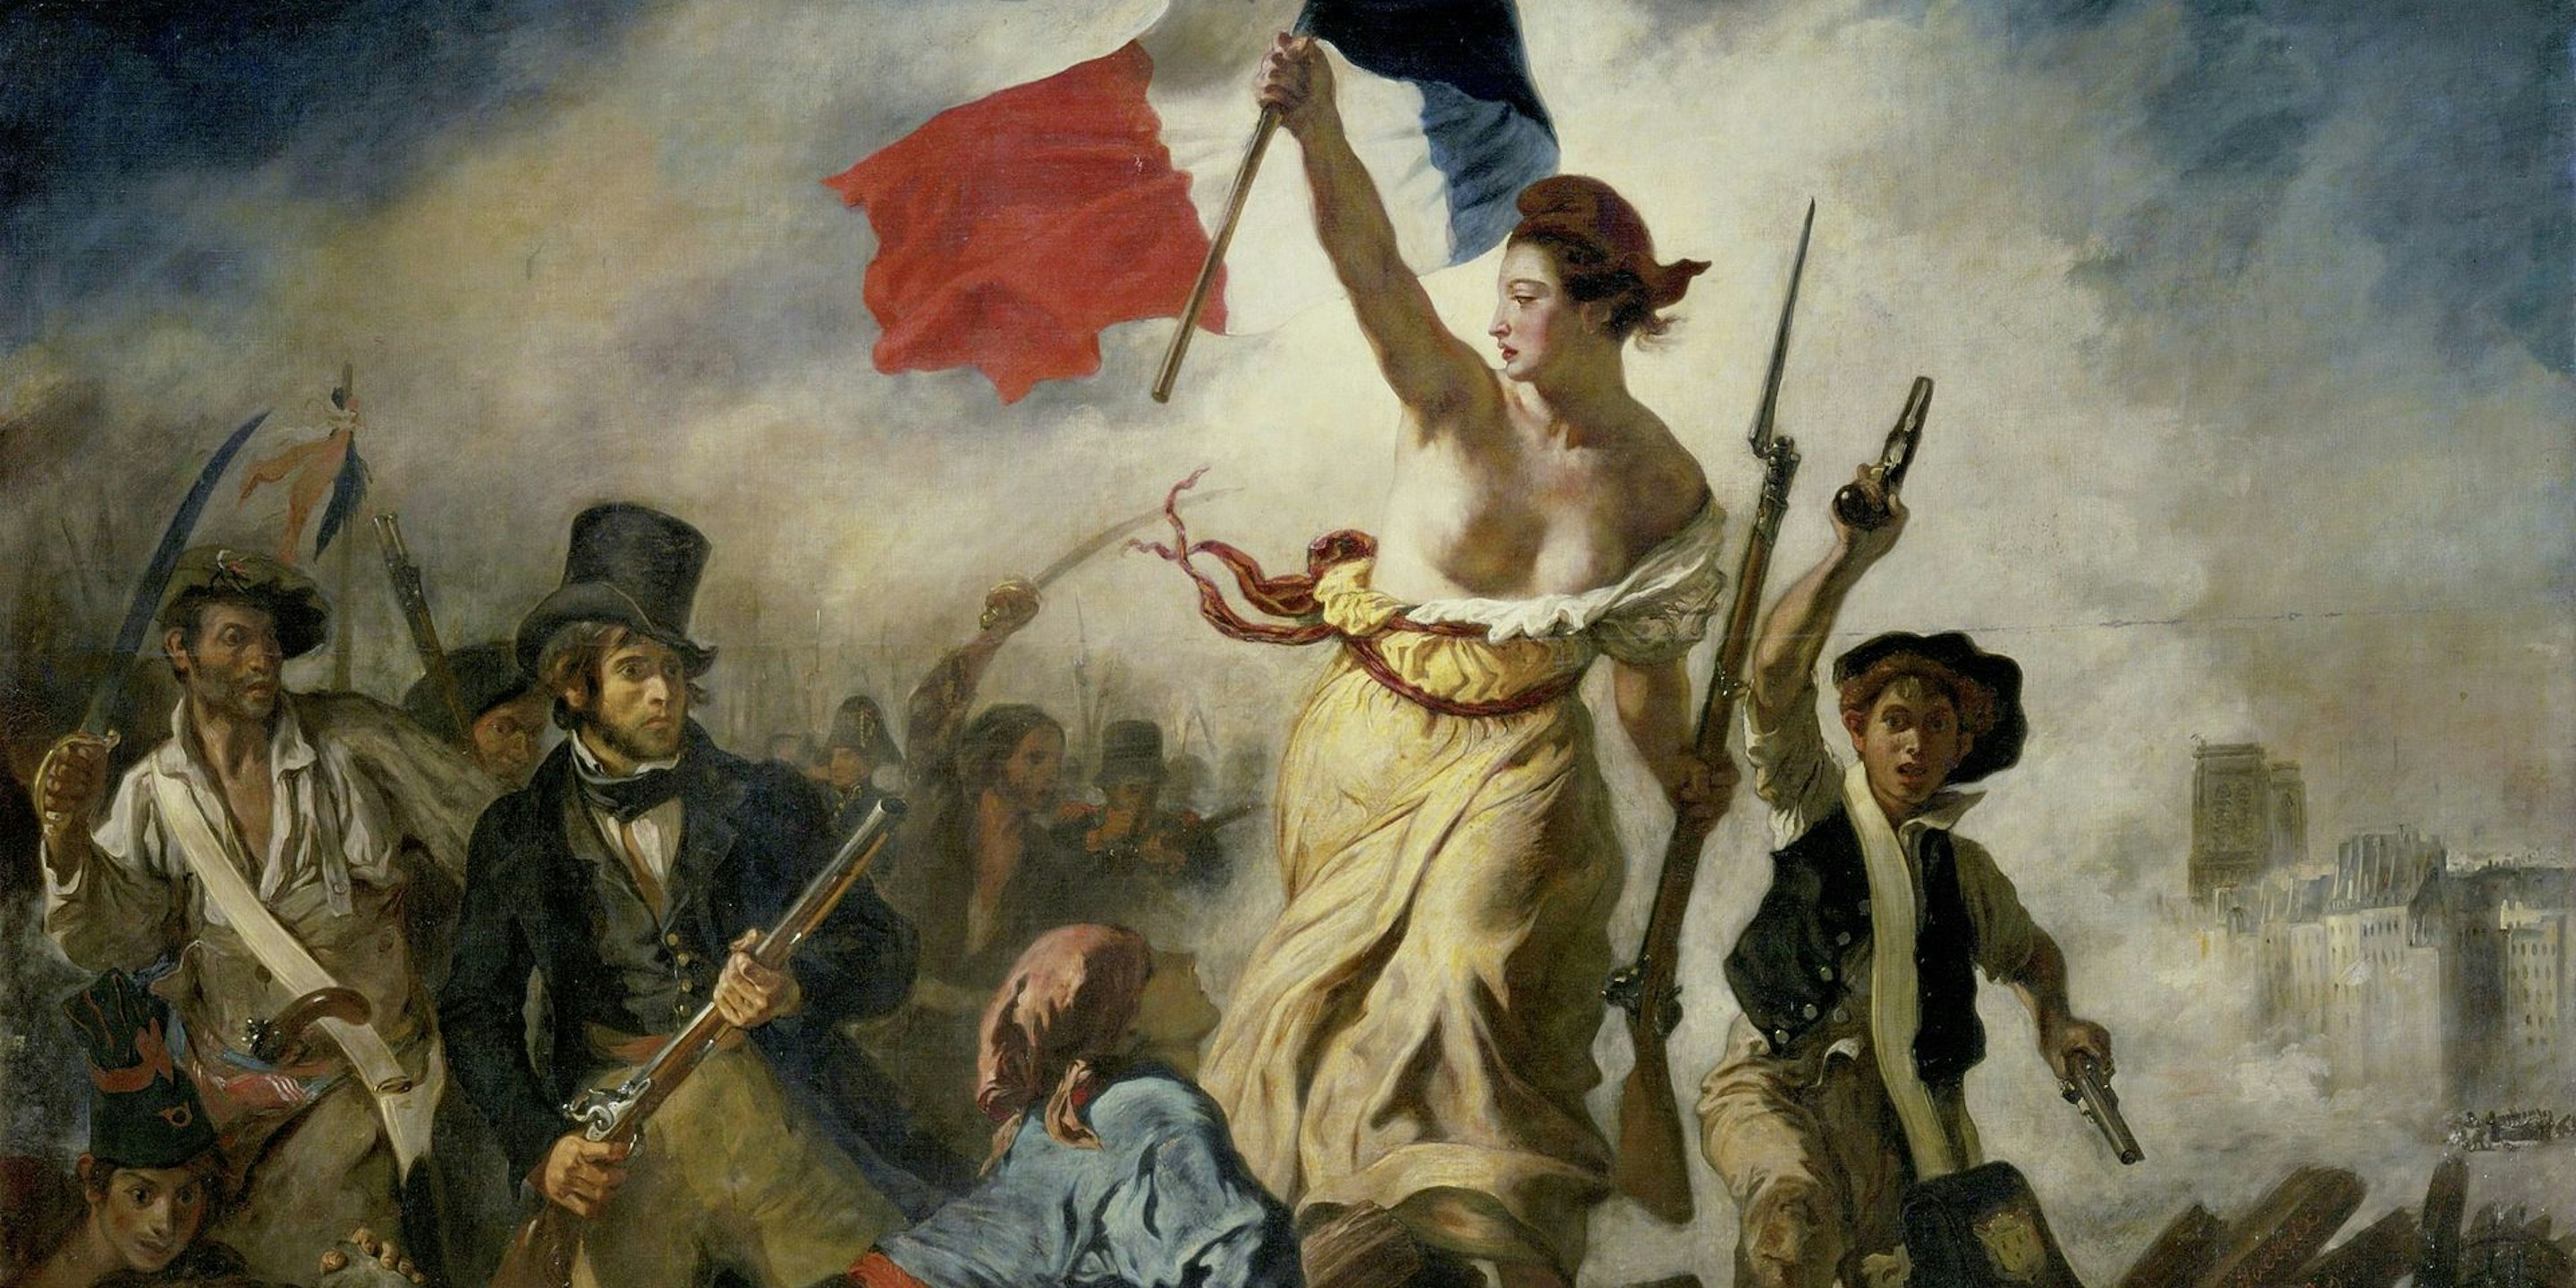 https://fsmedia.imgix.net/46/e4/c5/2a/98ab/4ff3/826e/8edc5e1f88ee/liberty-leading-the-people-by-eugene-delacroix.jpeg?rect=0,15,1920,960&dpr=1.5&auto=format,compress&q=75